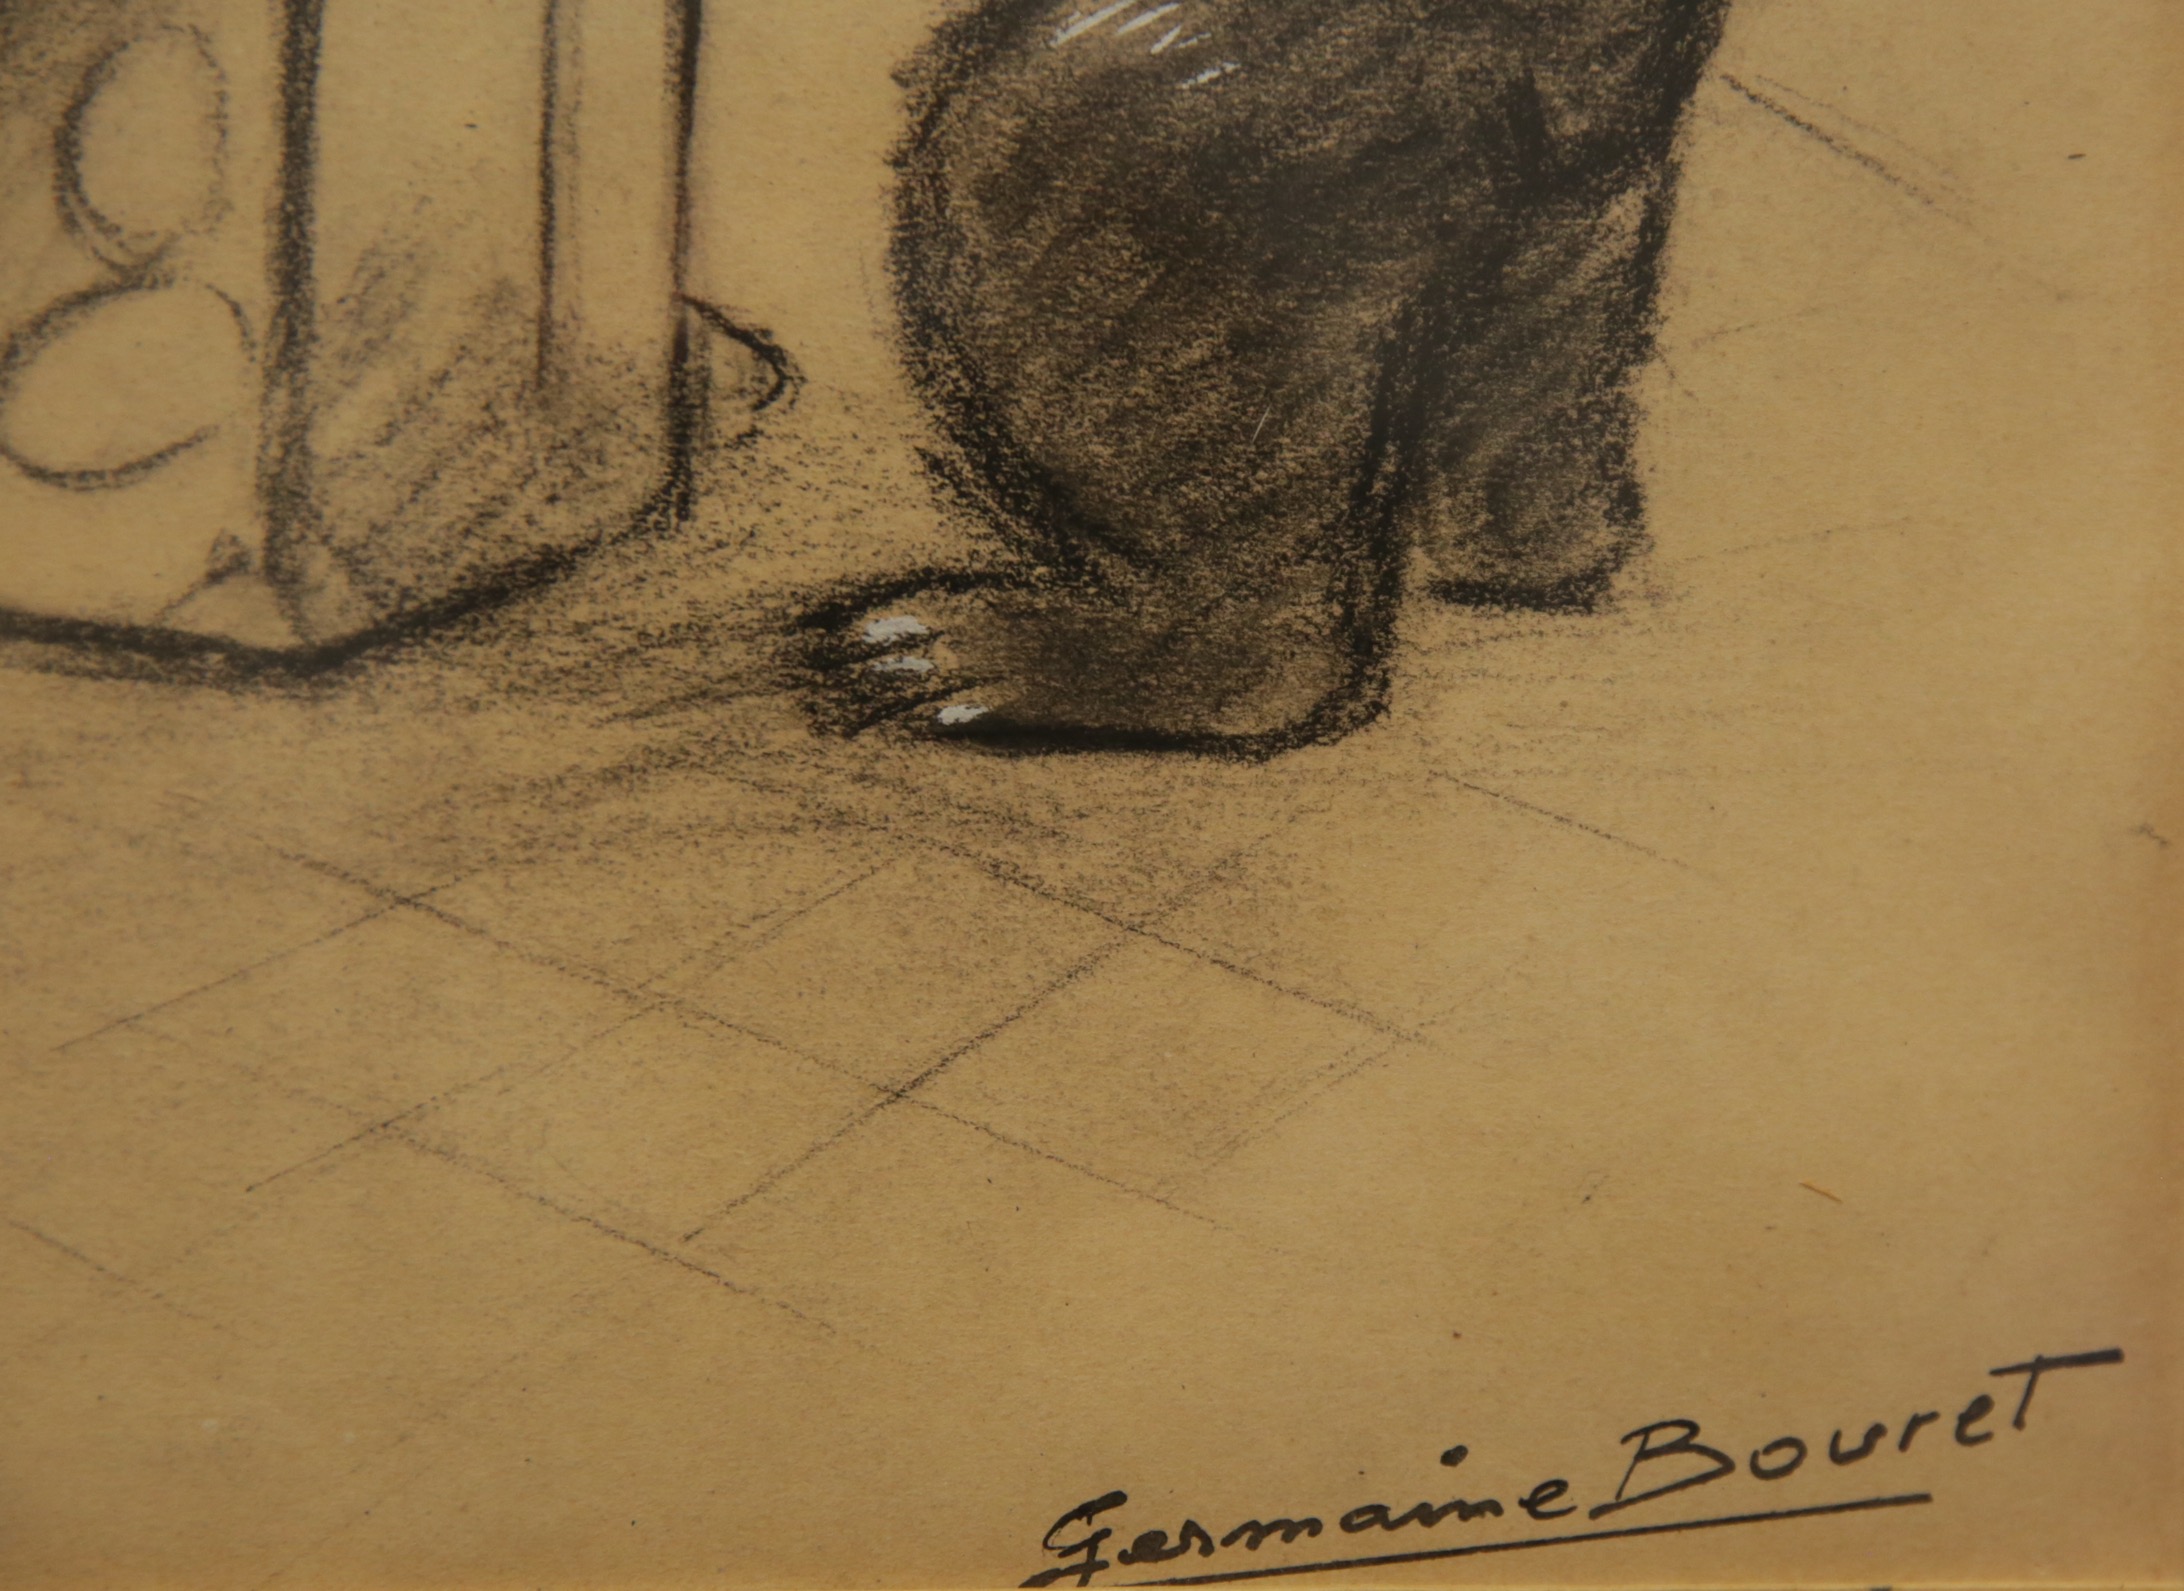 Germaine BOURET (1907-1953) "Child and bear", charcoal drawing and gouache, French, 20th C. - Image 6 of 6